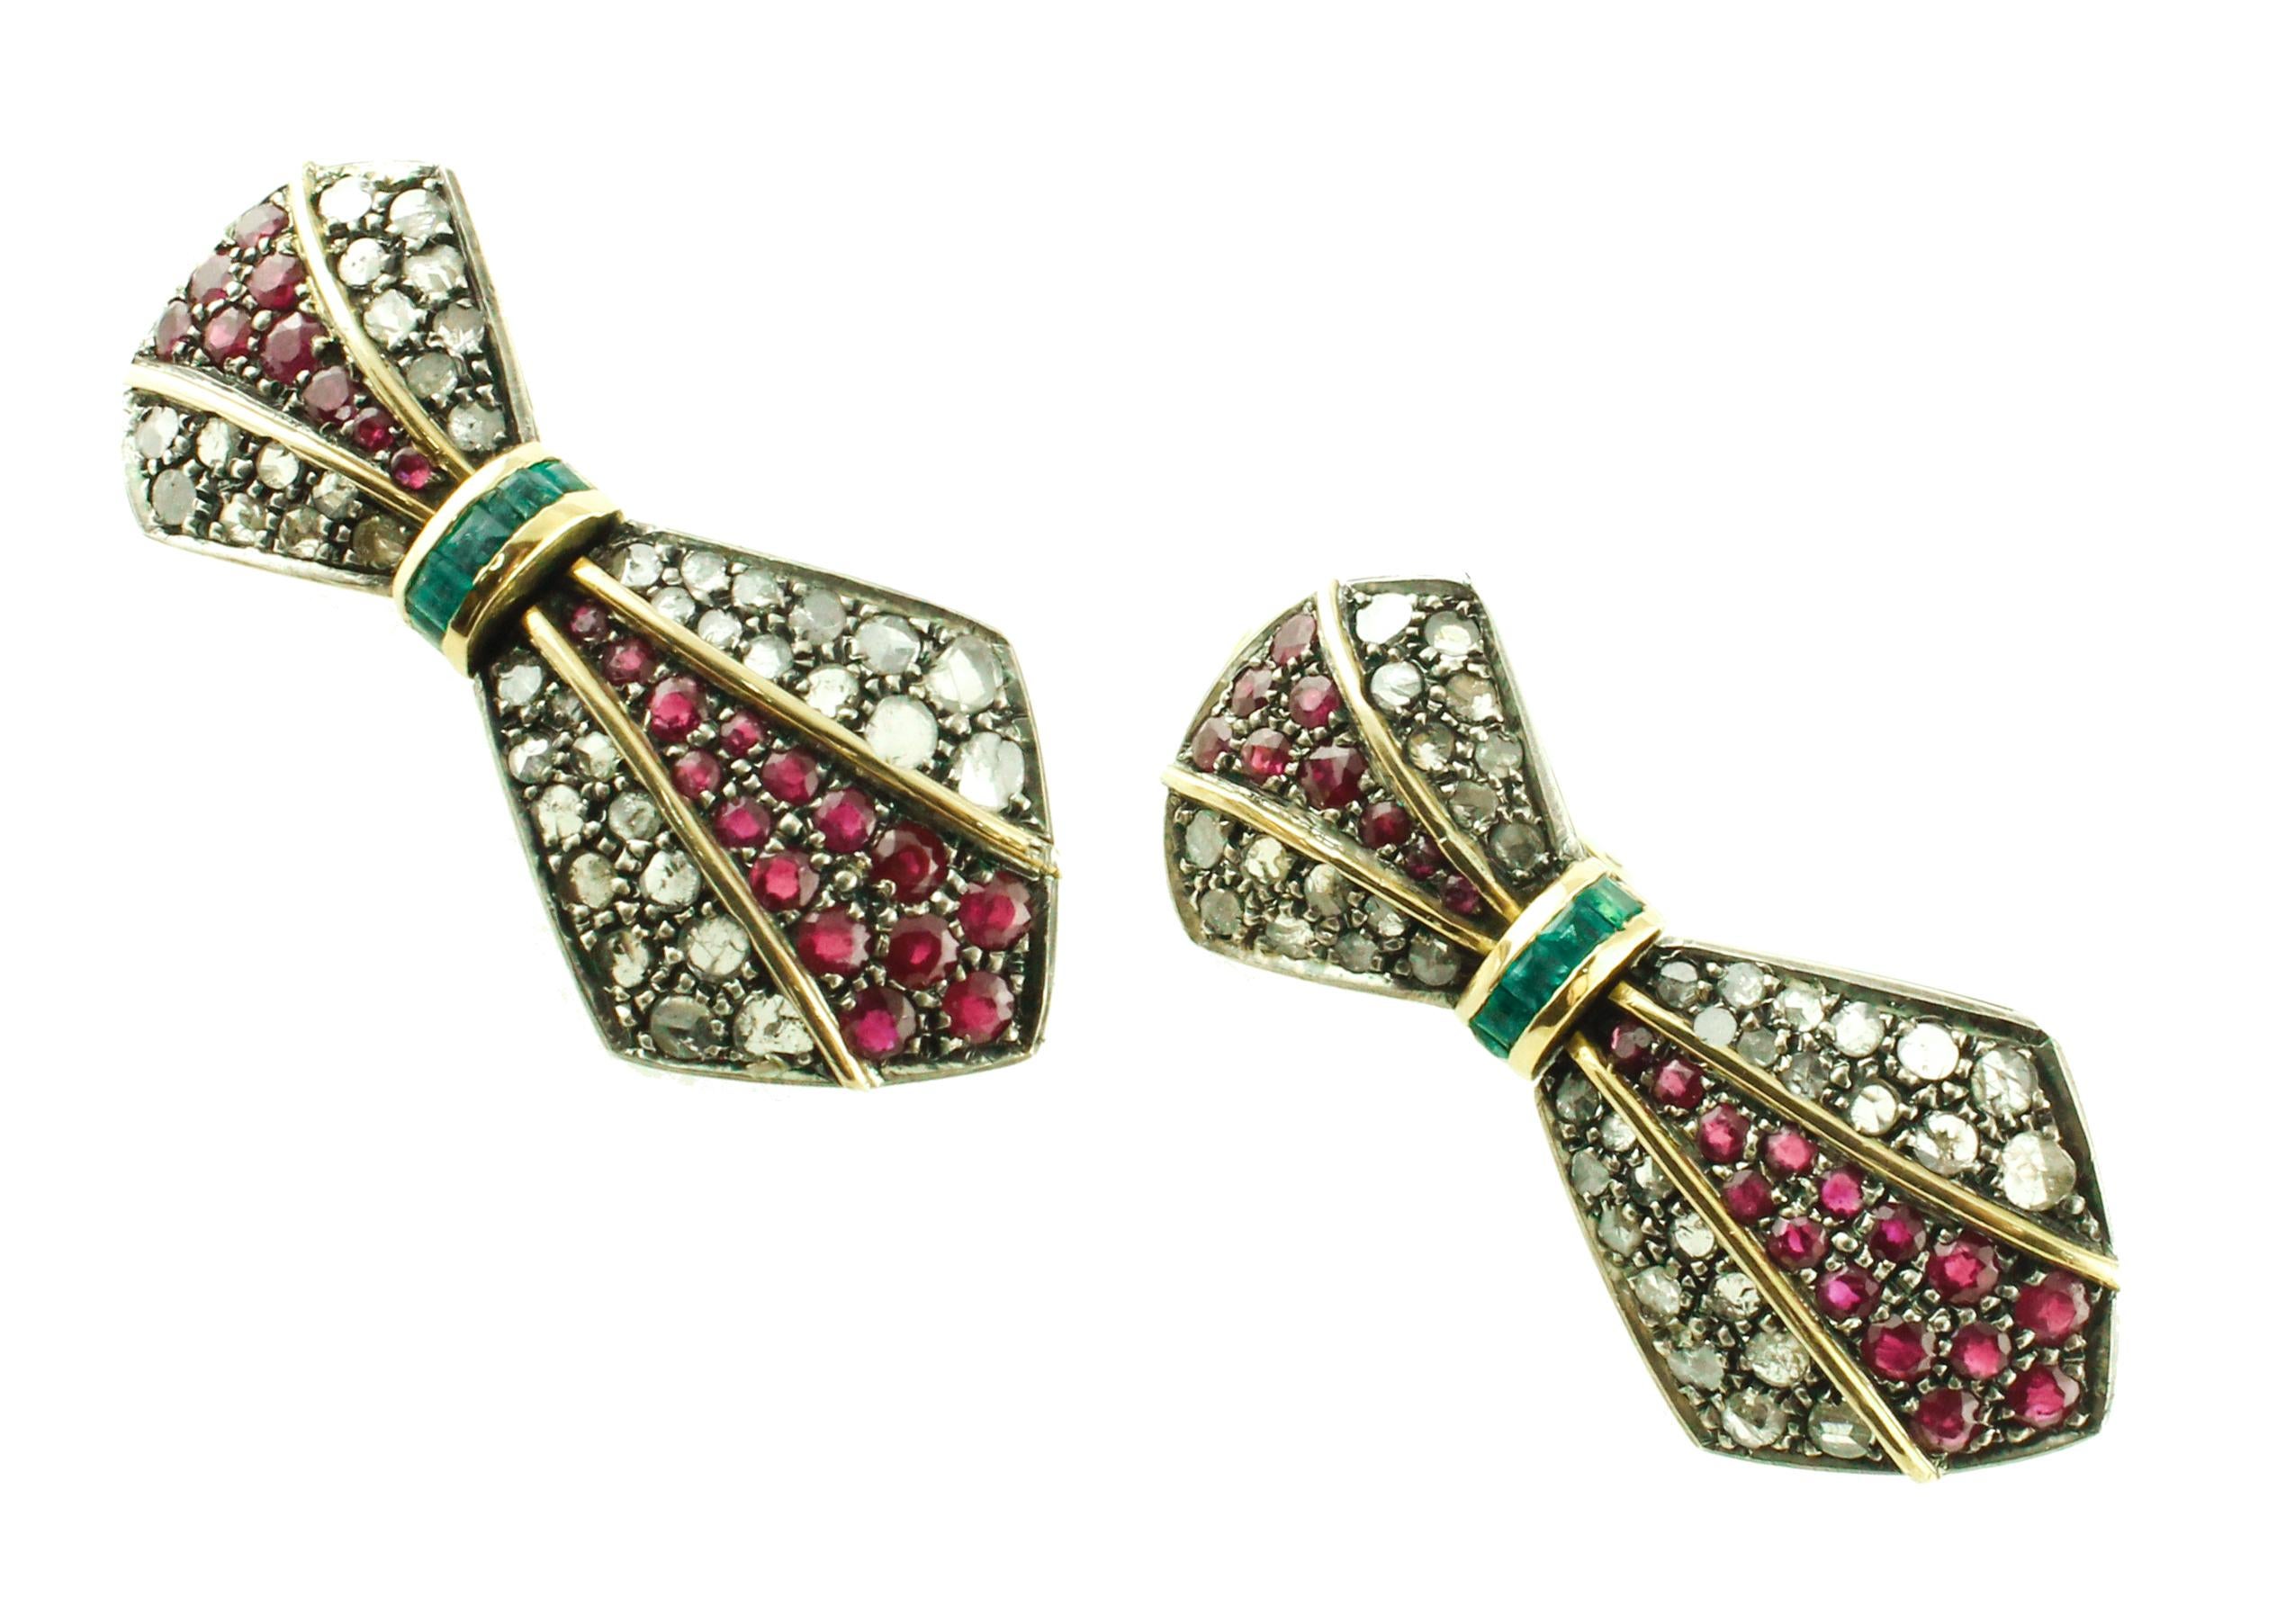 Retro Diamonds Rubies Emeralds Yellow Gold and Silver Earrings